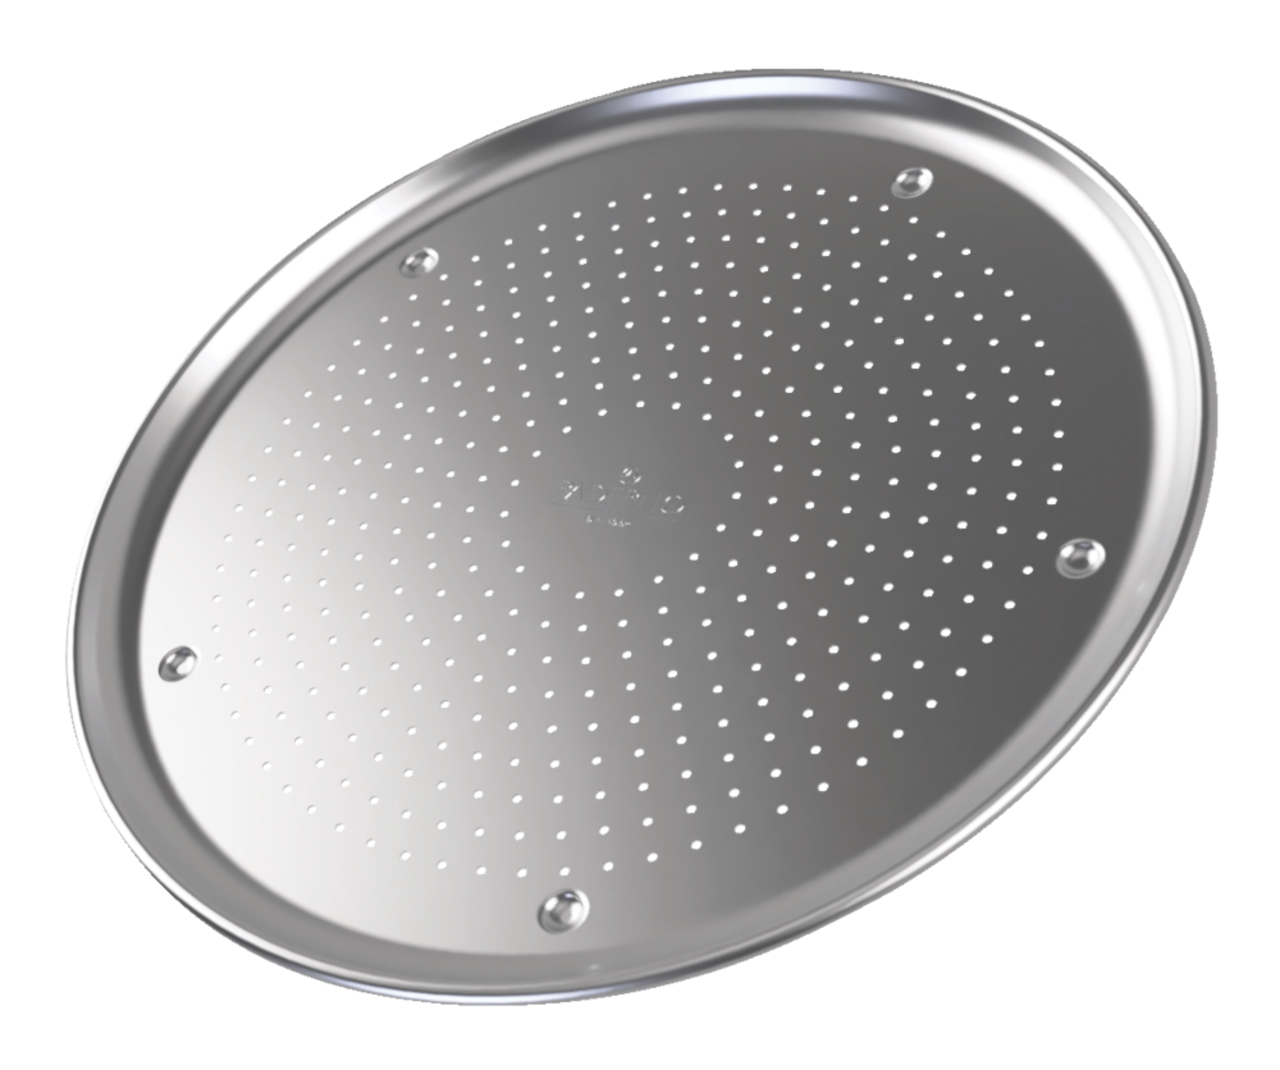 https://media-www.canadiantire.ca/product/living/kitchen/bakeware-baking-prep/1424872/paderno-professional-uncoated-aluminum-16-pizza-crisper-aebe7fa7-5158-4d99-a398-bc775ef0f846.png?imdensity=1&imwidth=640&impolicy=mZoom